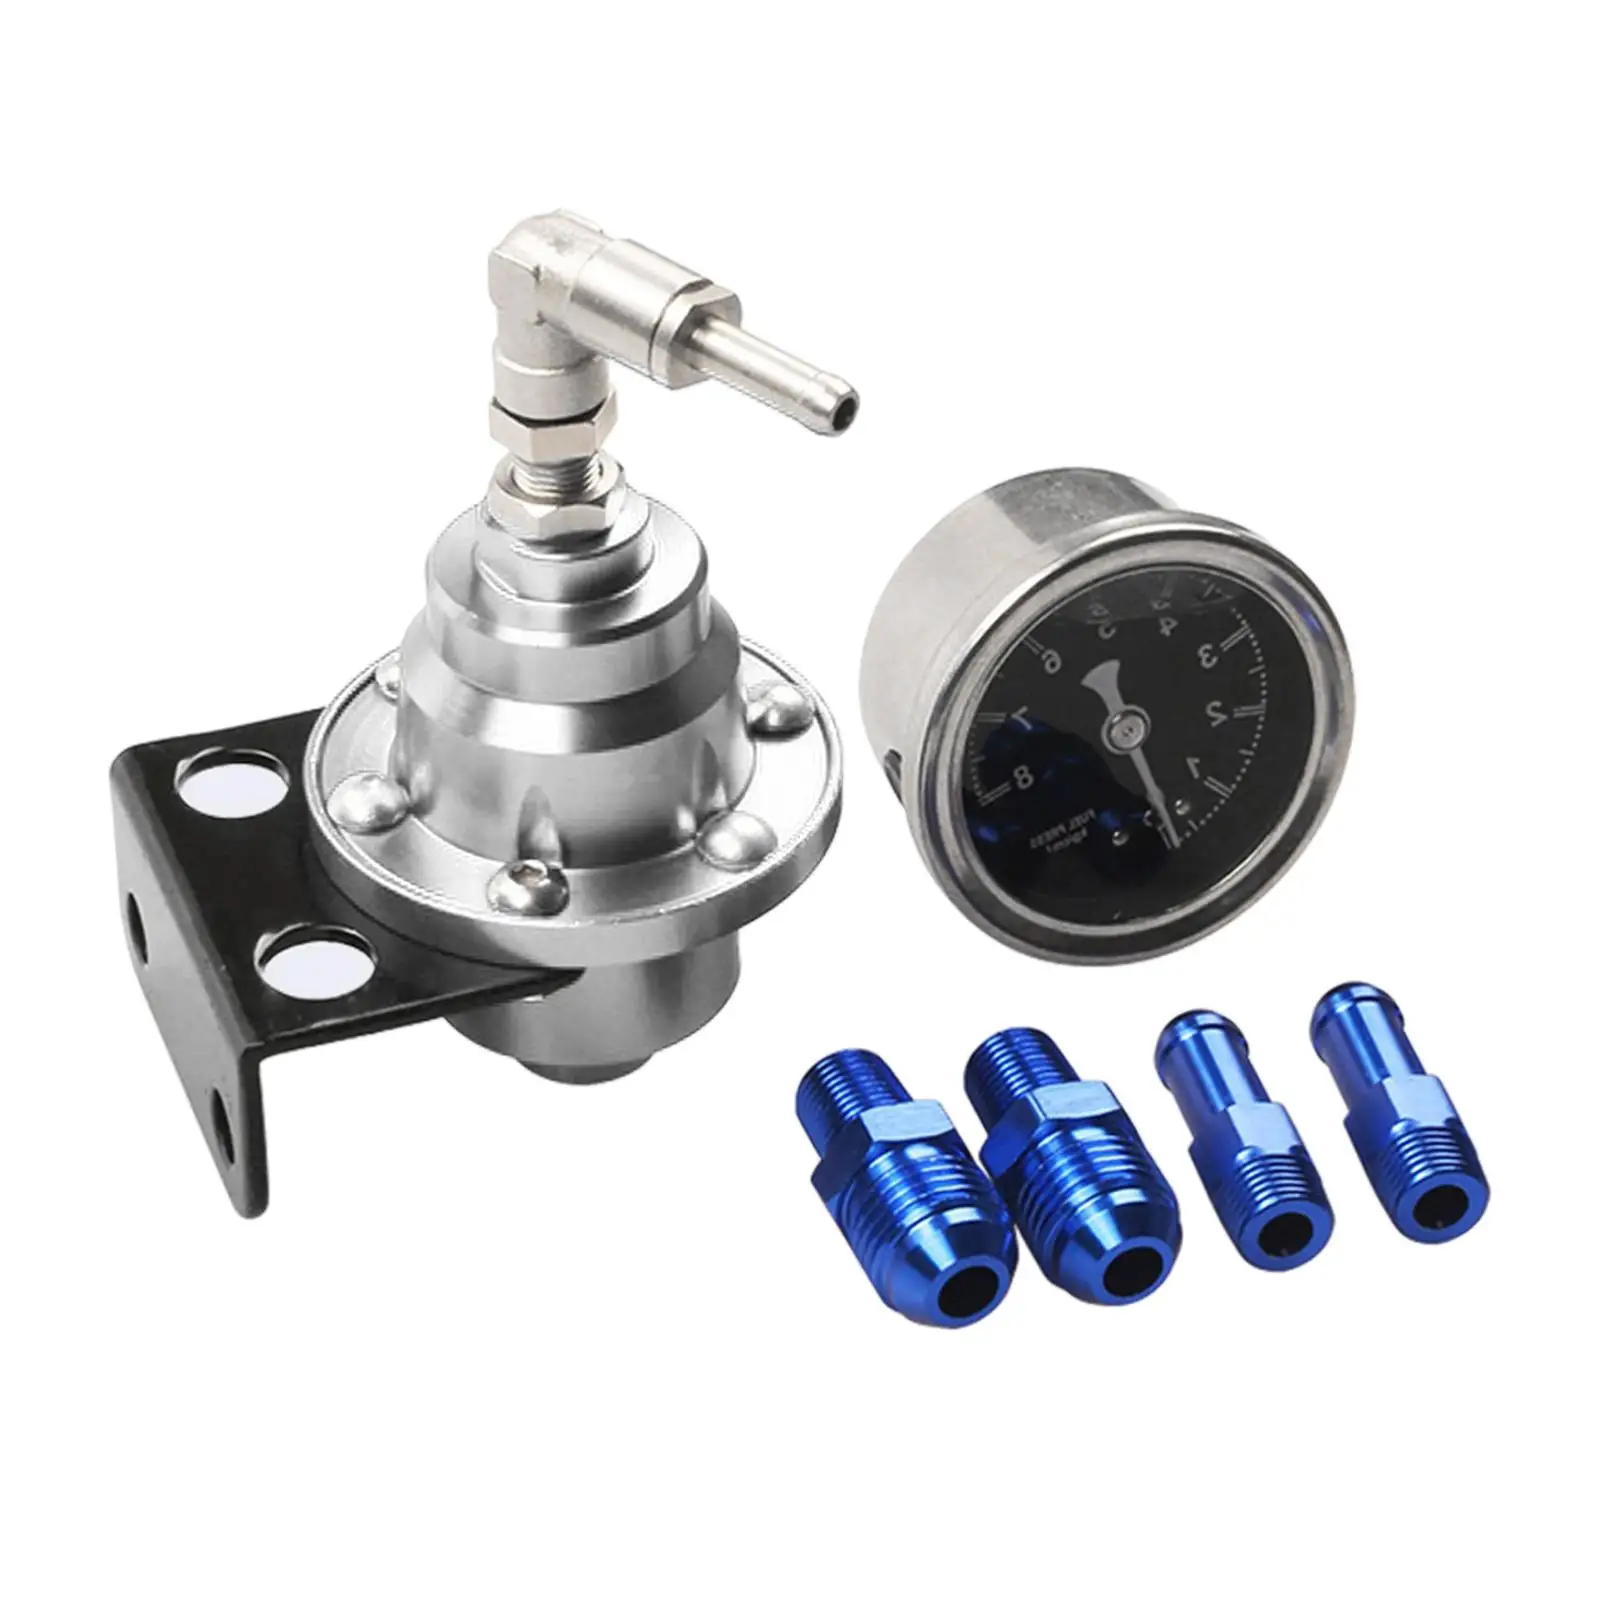 Universal Adjustable Fuel Pressure Regulator with Gauge Automotive Accessories Replace Parts with 4 Connectors 200-800Kpa